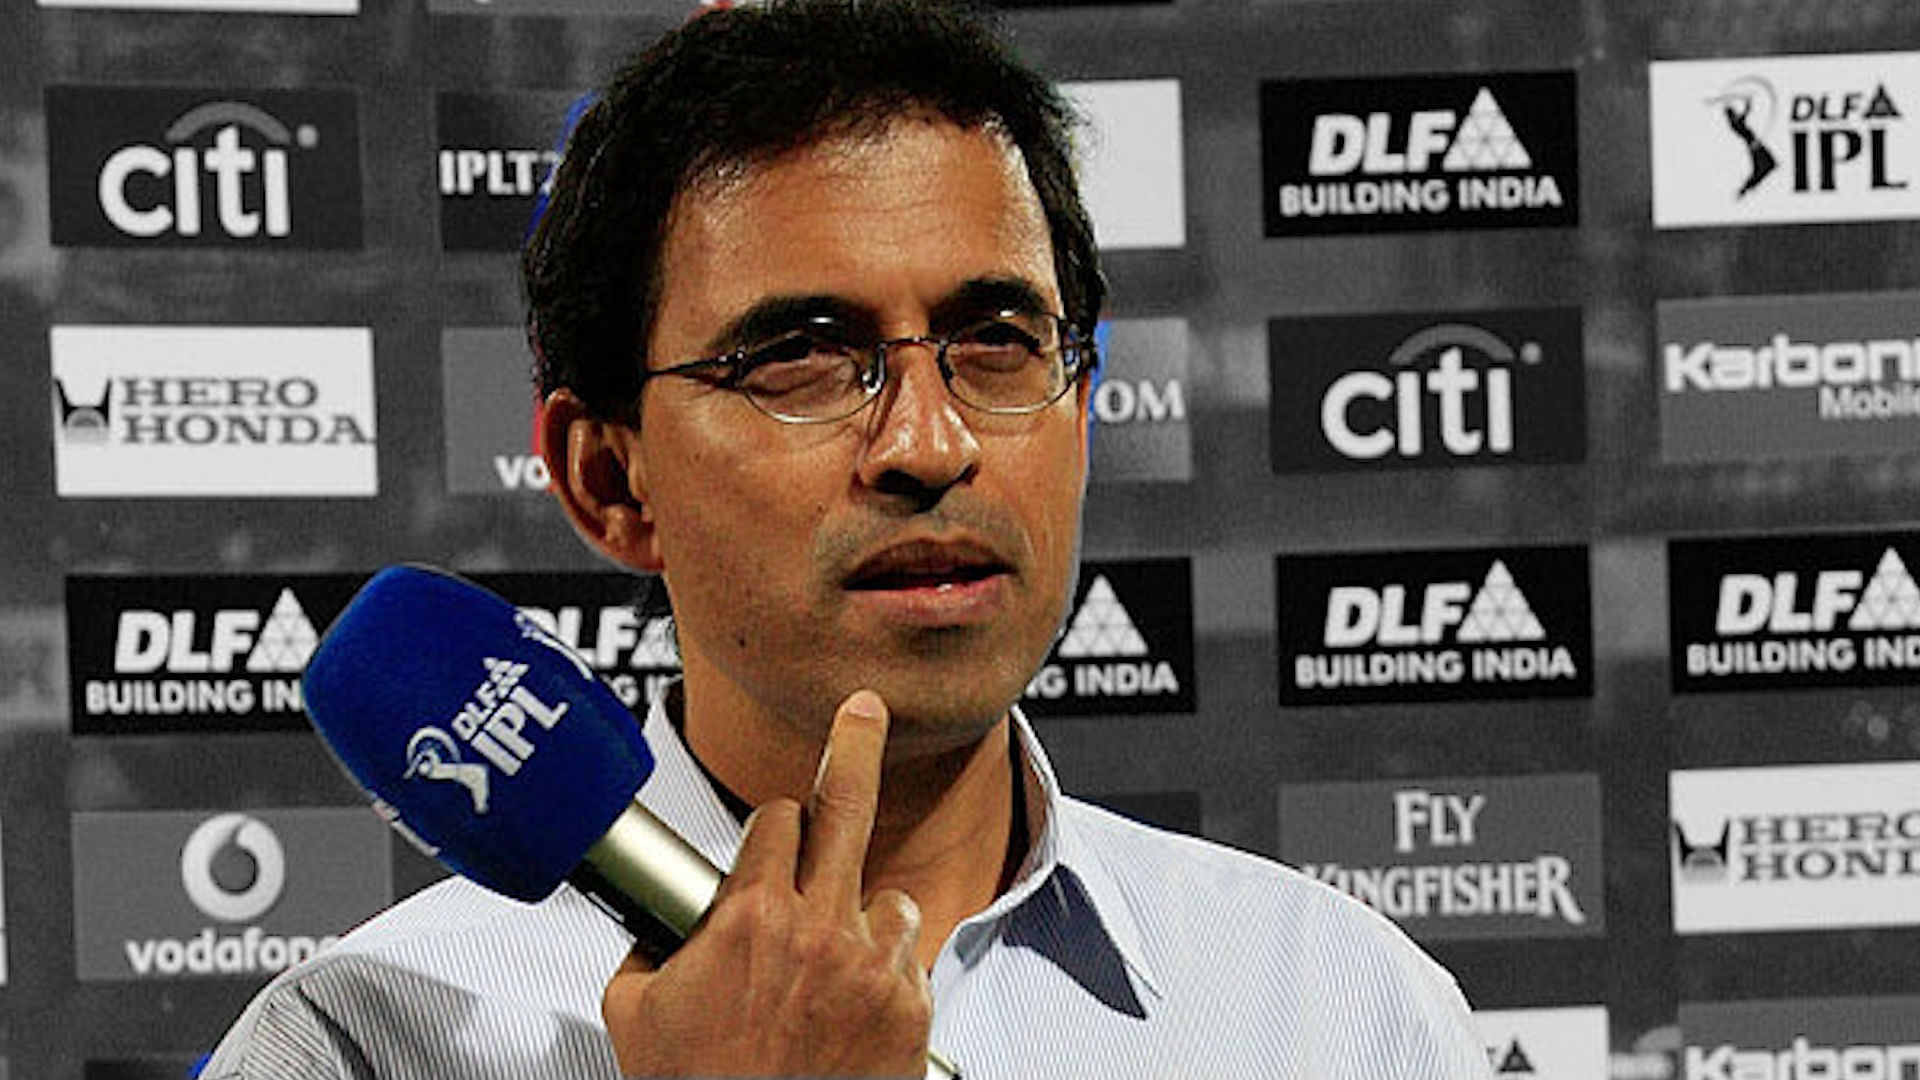 Harsha Bhogle has not been given a formal reason for his removal from the IPL team. (Photo: ANI)